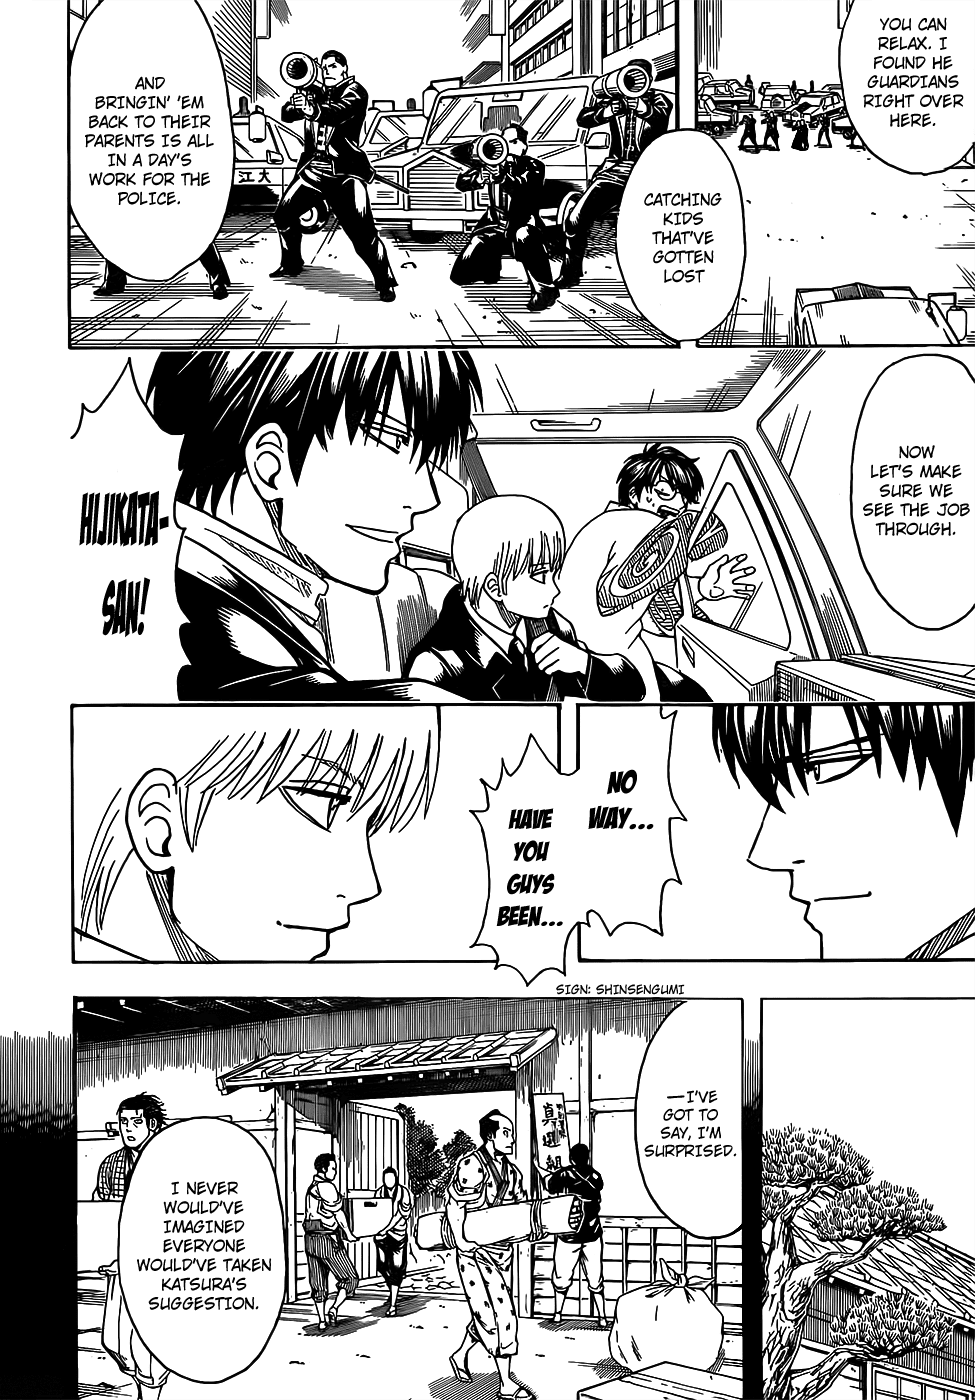 Gintama Chapter 692 Page 10